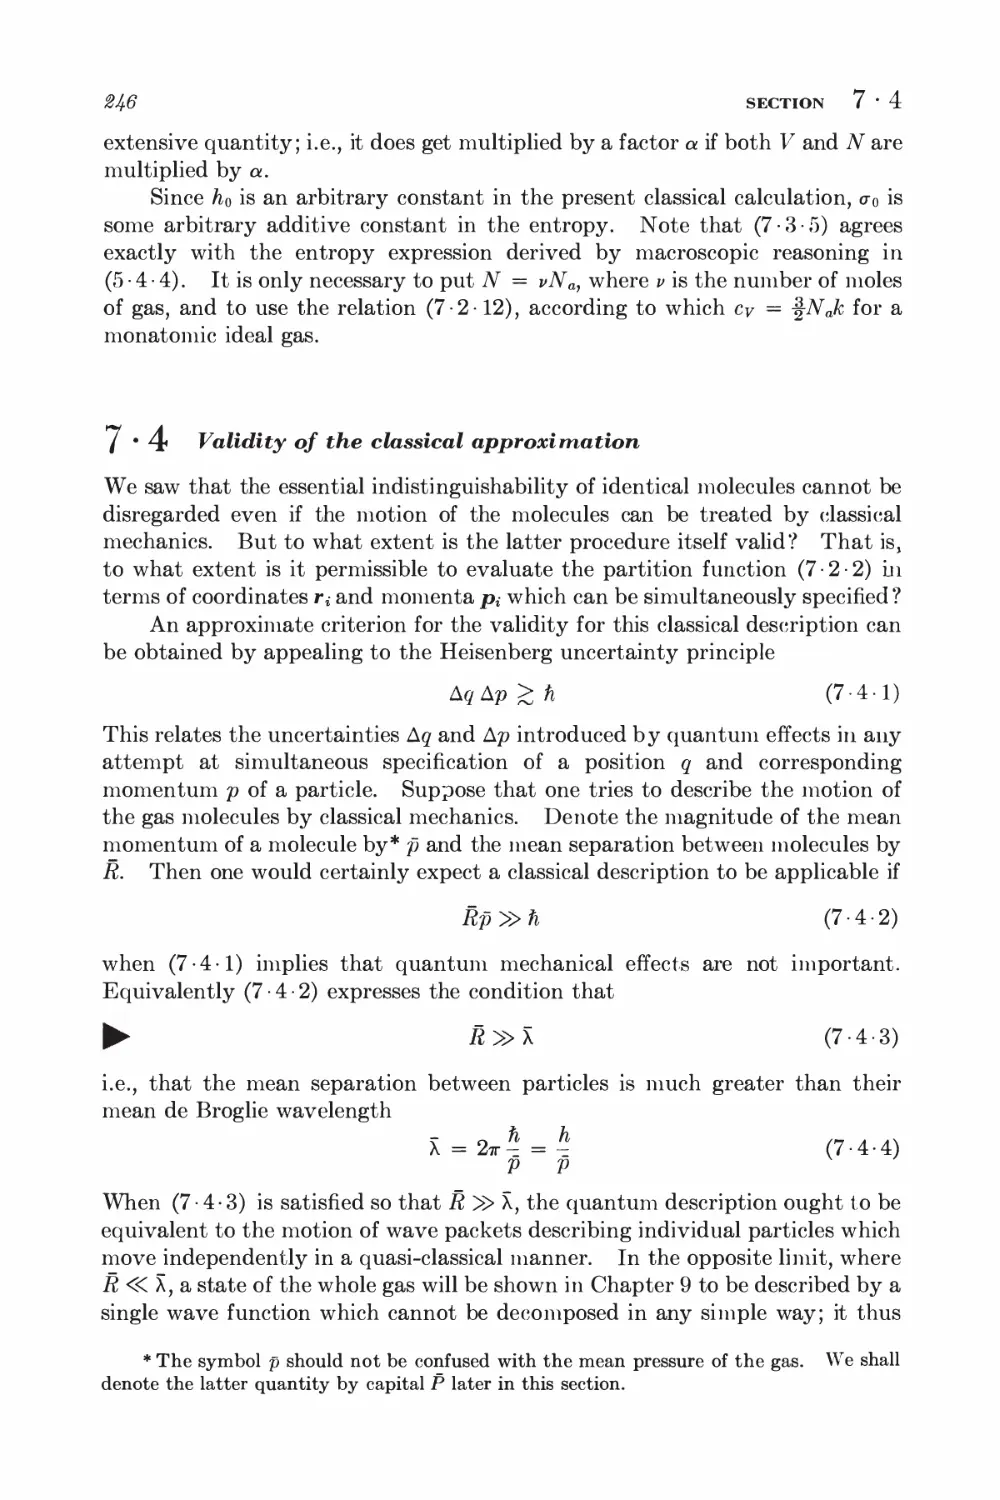 7.4 Validity of the classical approximation